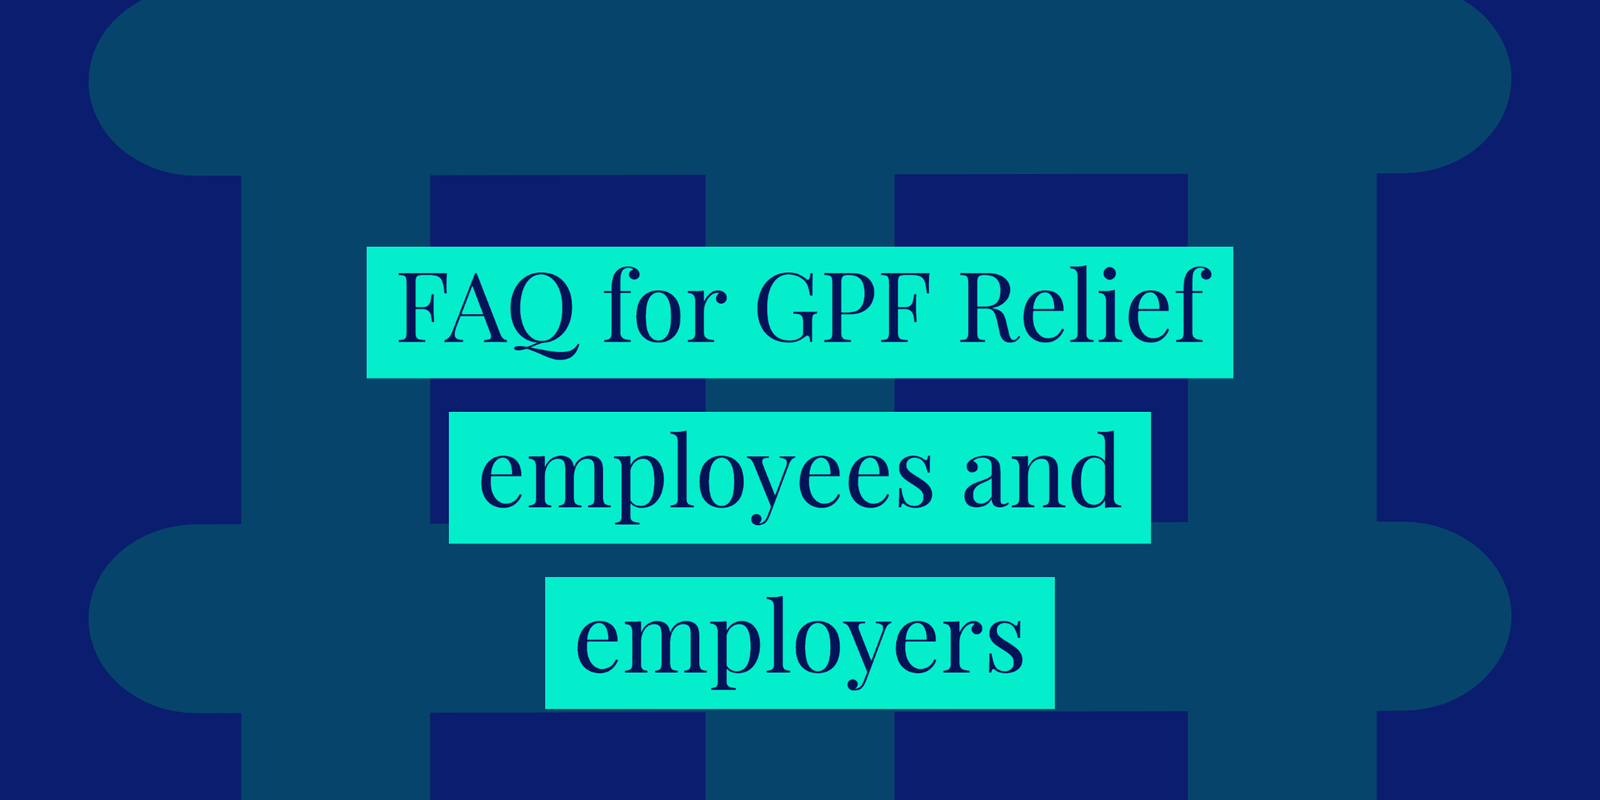 GPF Relief